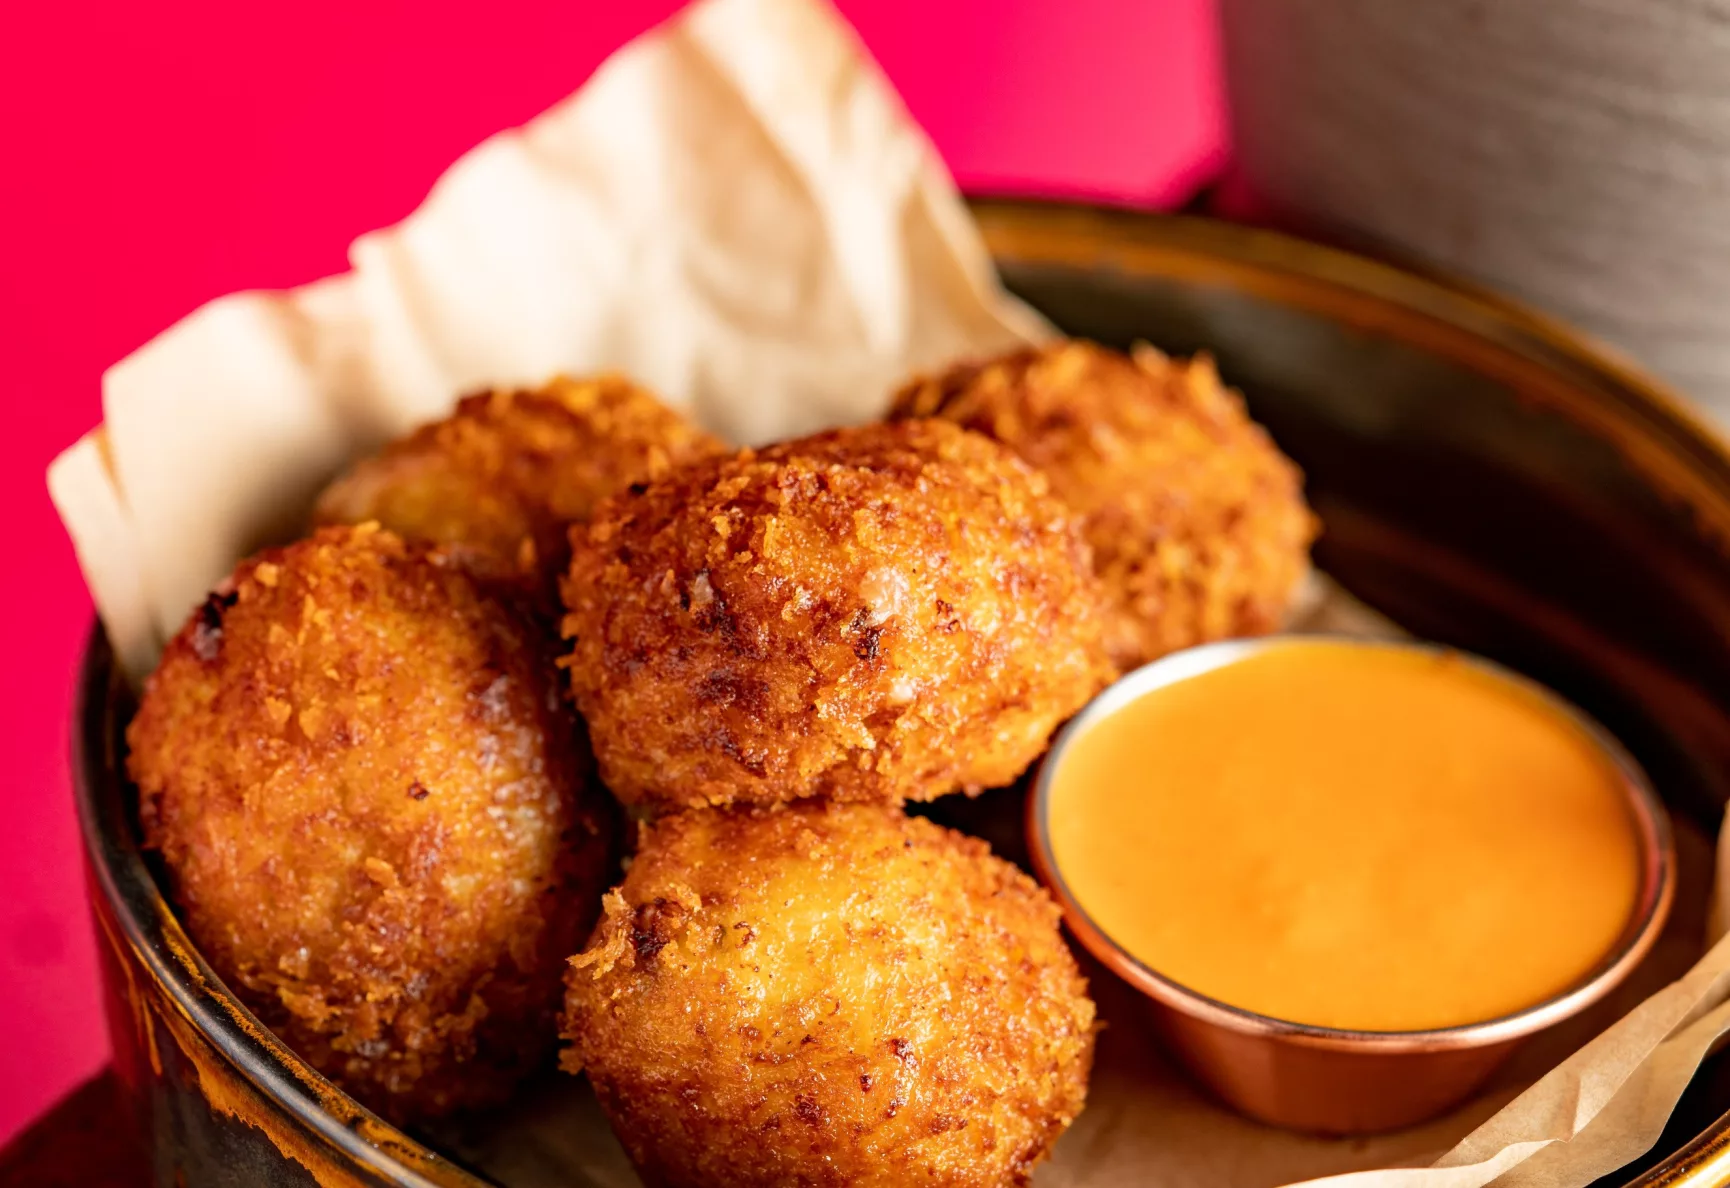 Breaded bites with a dipping sauce